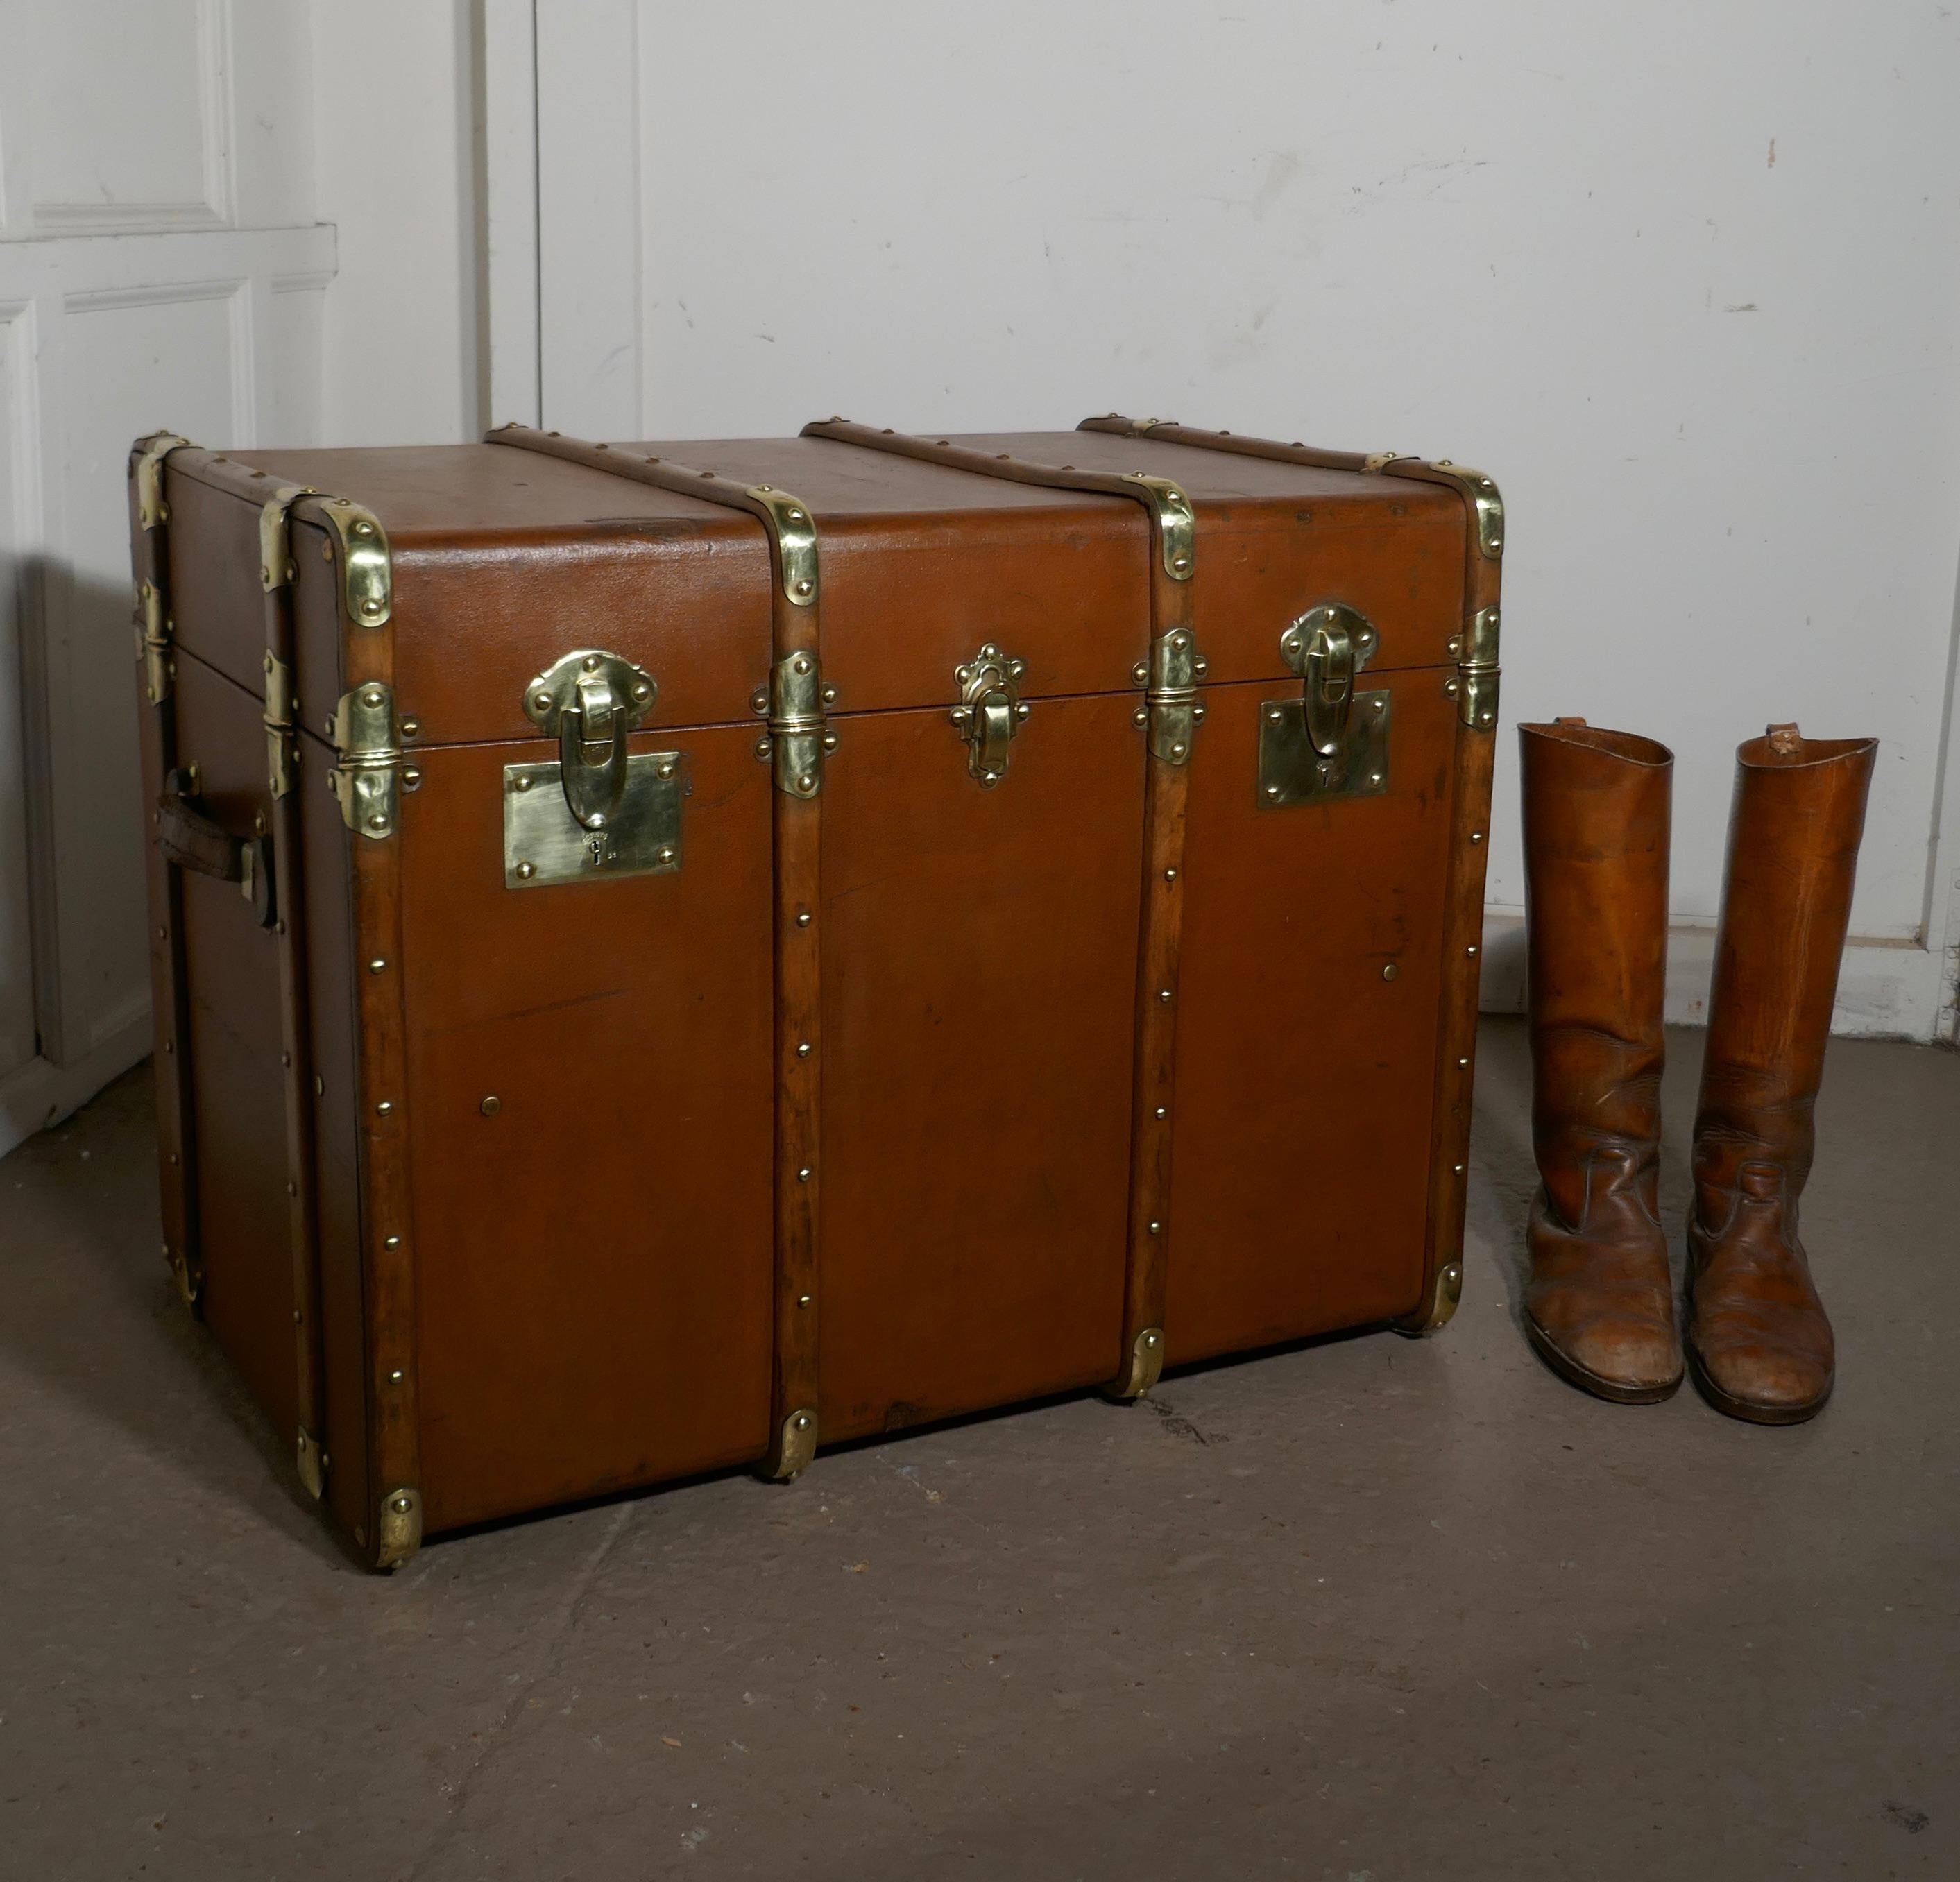 Large tan canvas, wood and brass bound steamer trunk 

This is a very top quality 19th century travel trunk, it is covered in canvas, it has wooden and brass banding and studs, on the sides there are leather carrying handles and on the front 3